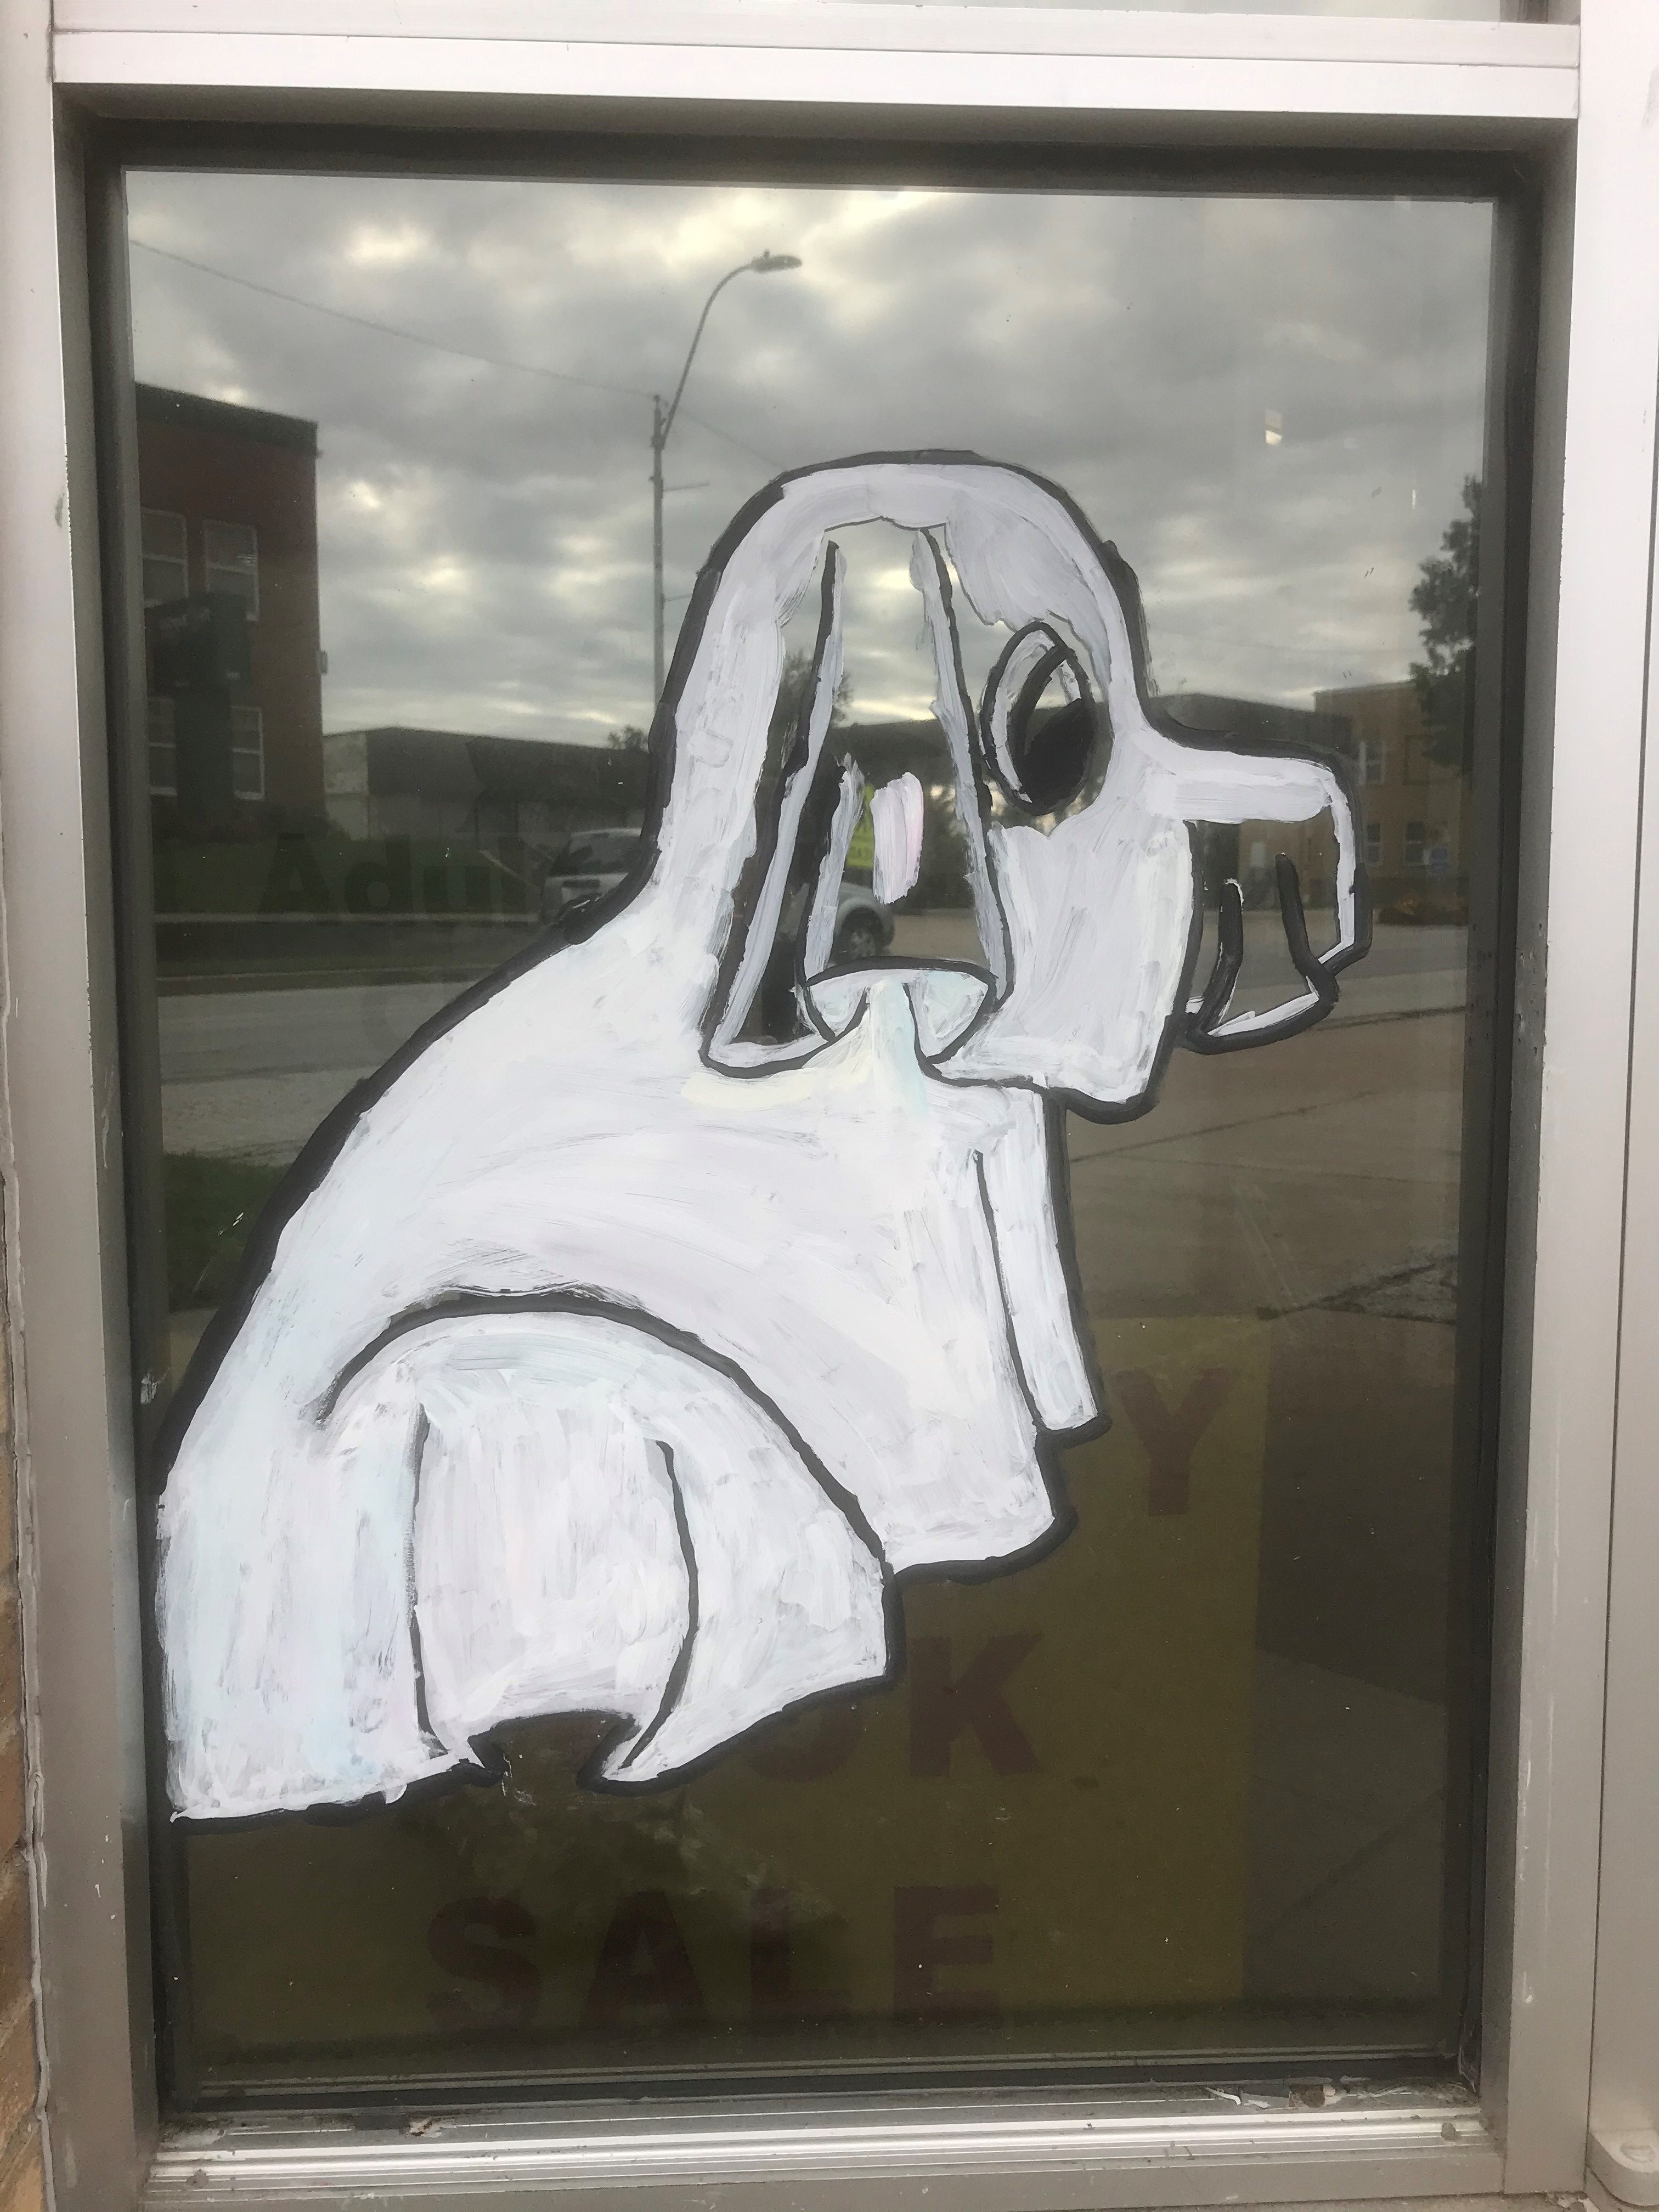 Clifford wearing a white ghost costume painted on a glass window of a building.